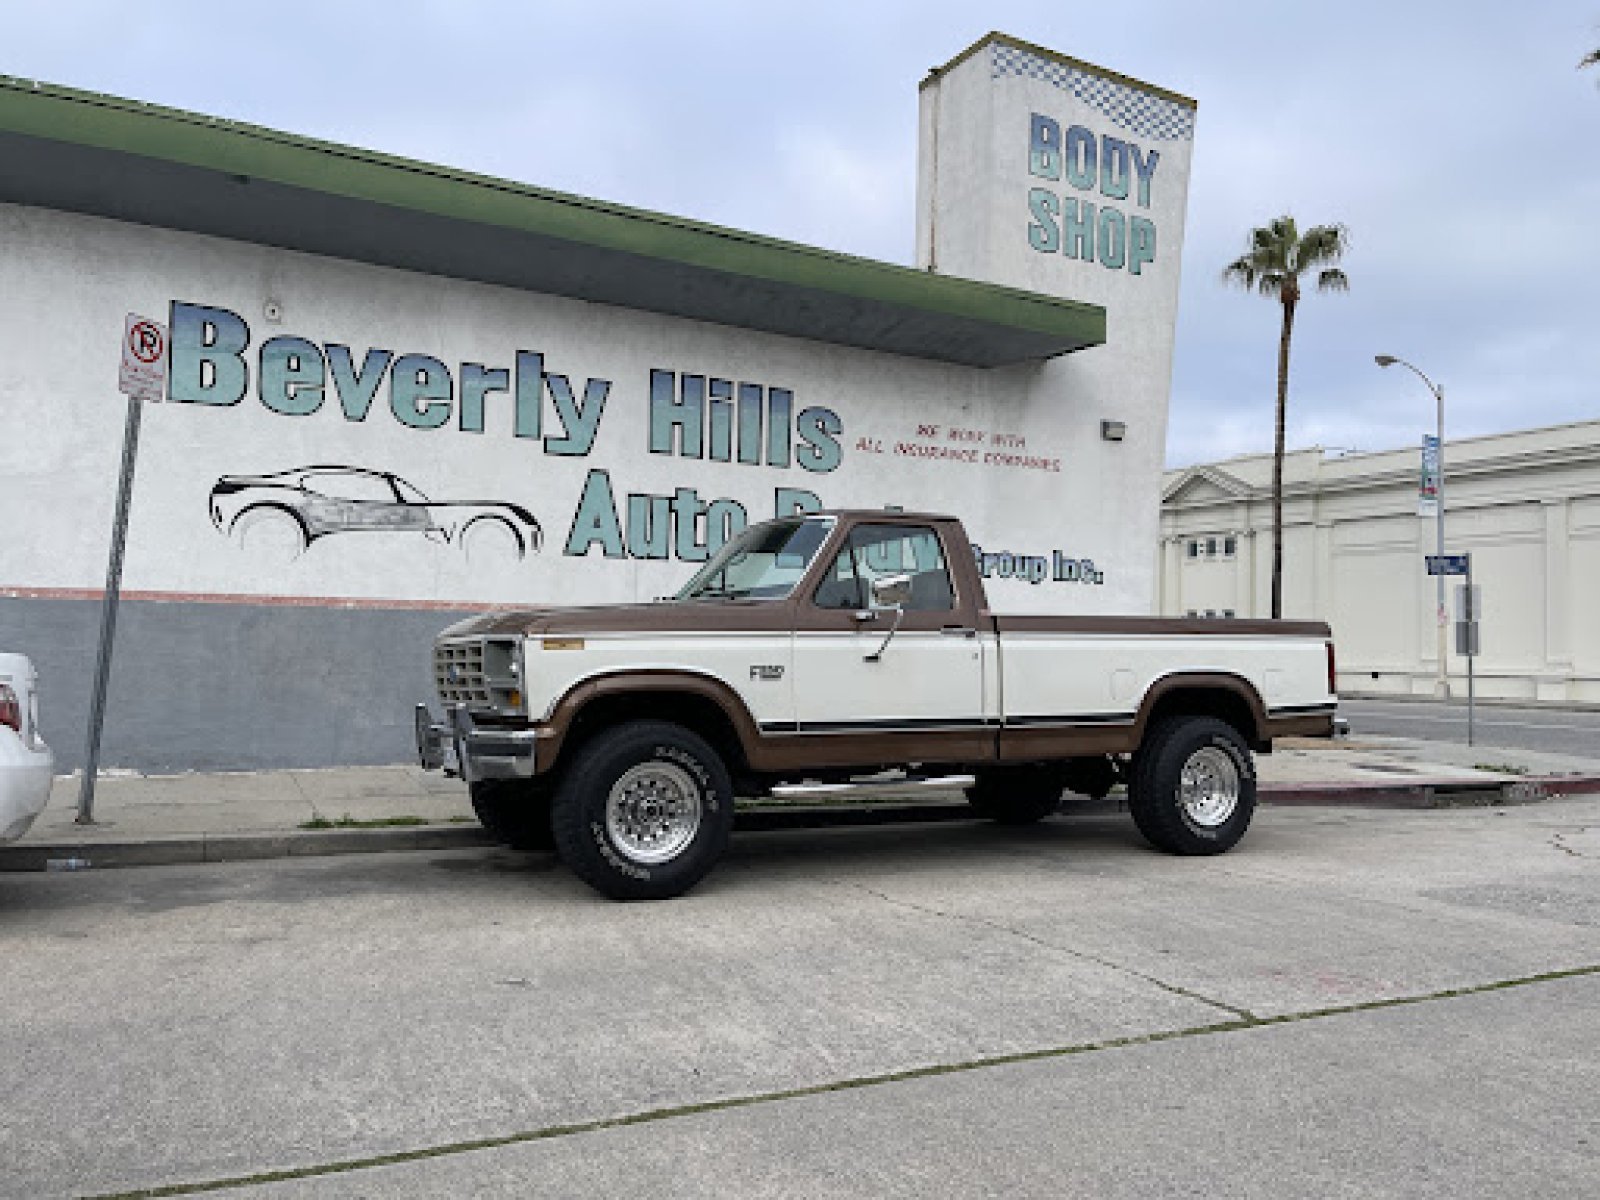 1982 Ford F-250